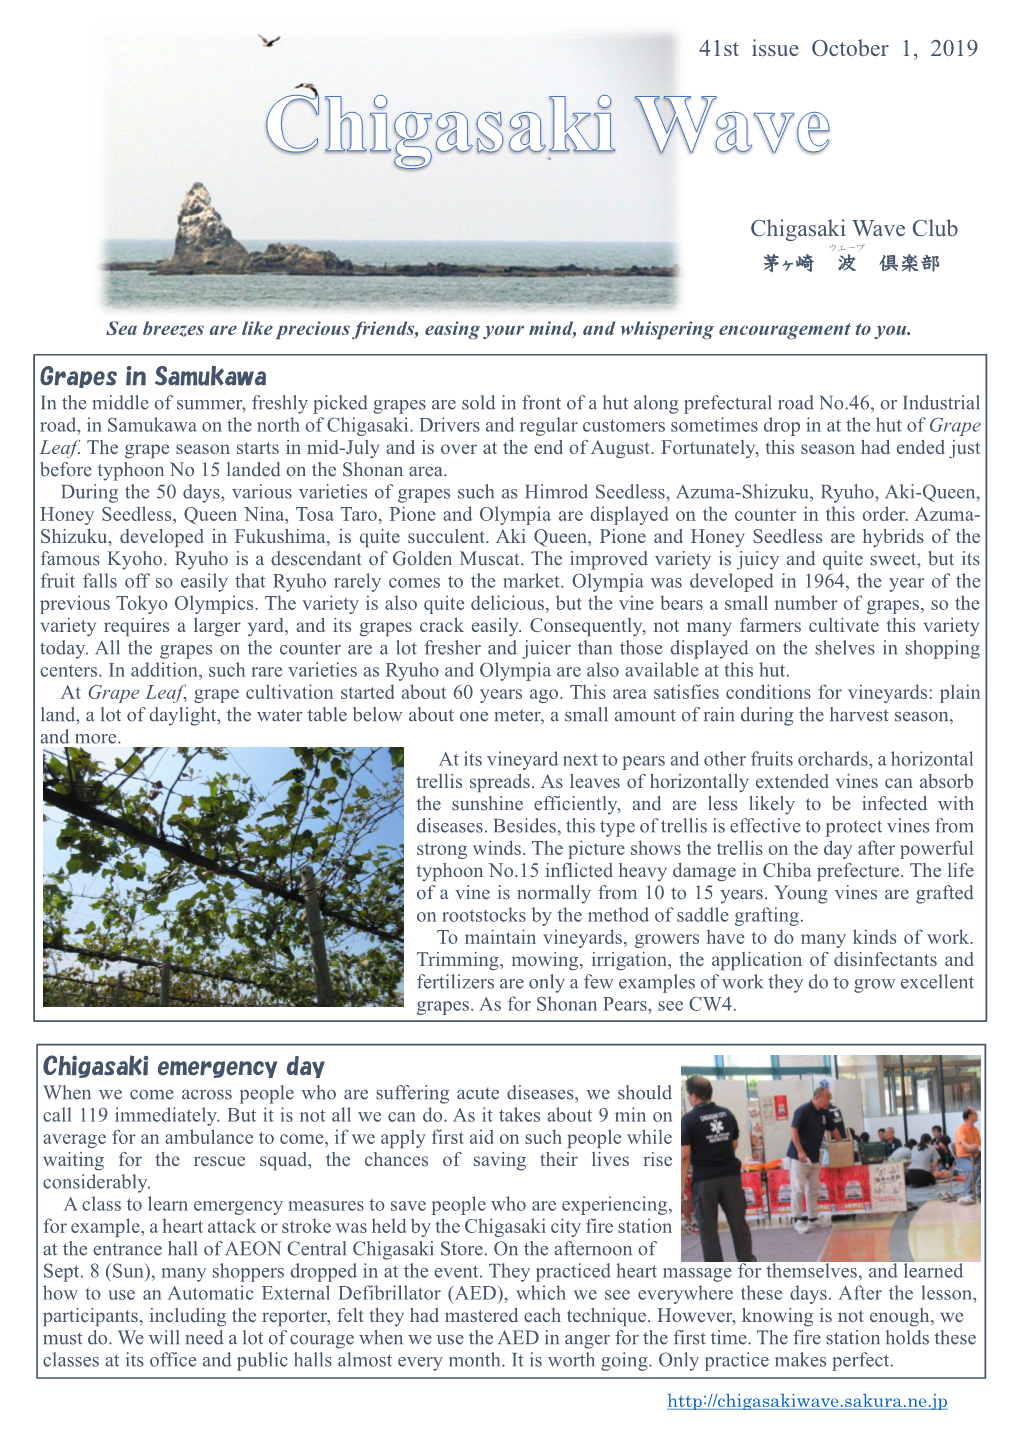 Chigasaki Wave Club 41St Issue October 1, 2019 Grapes In